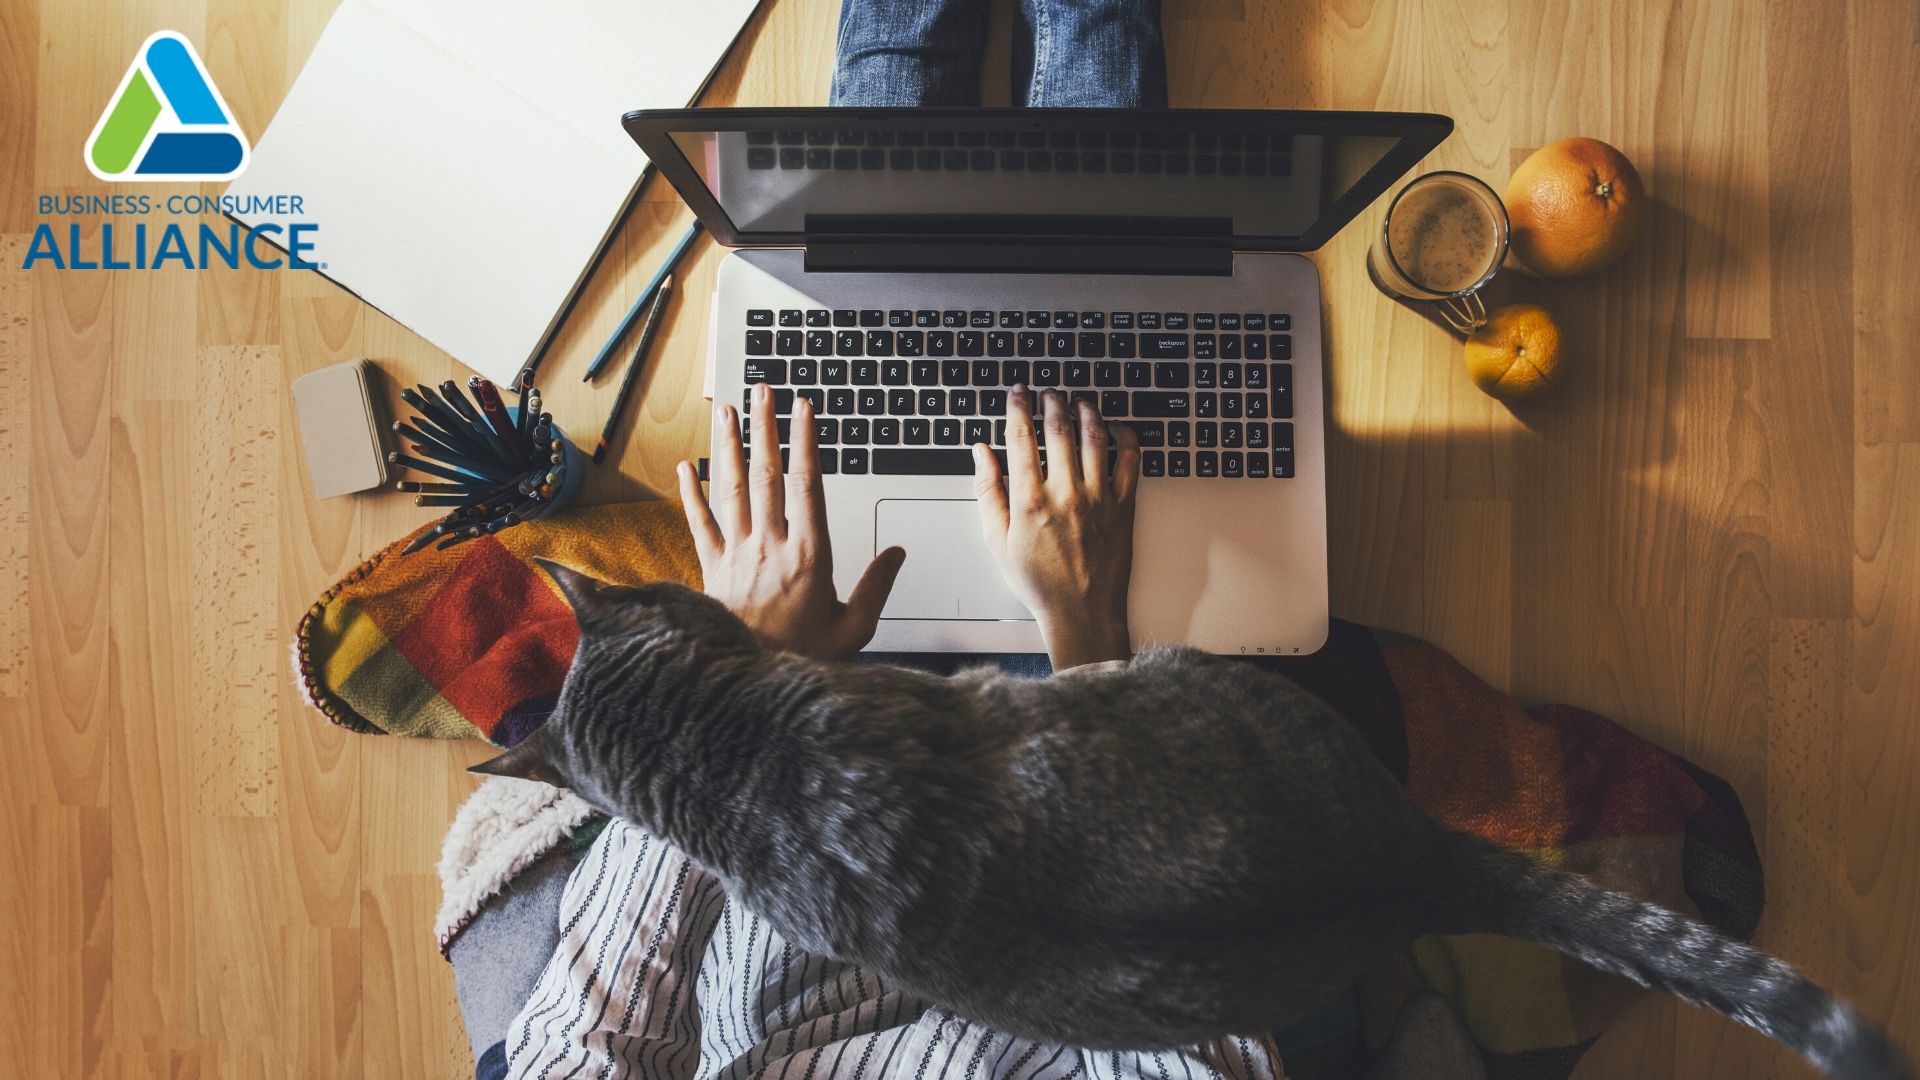 Cybersecurity While Working From Home